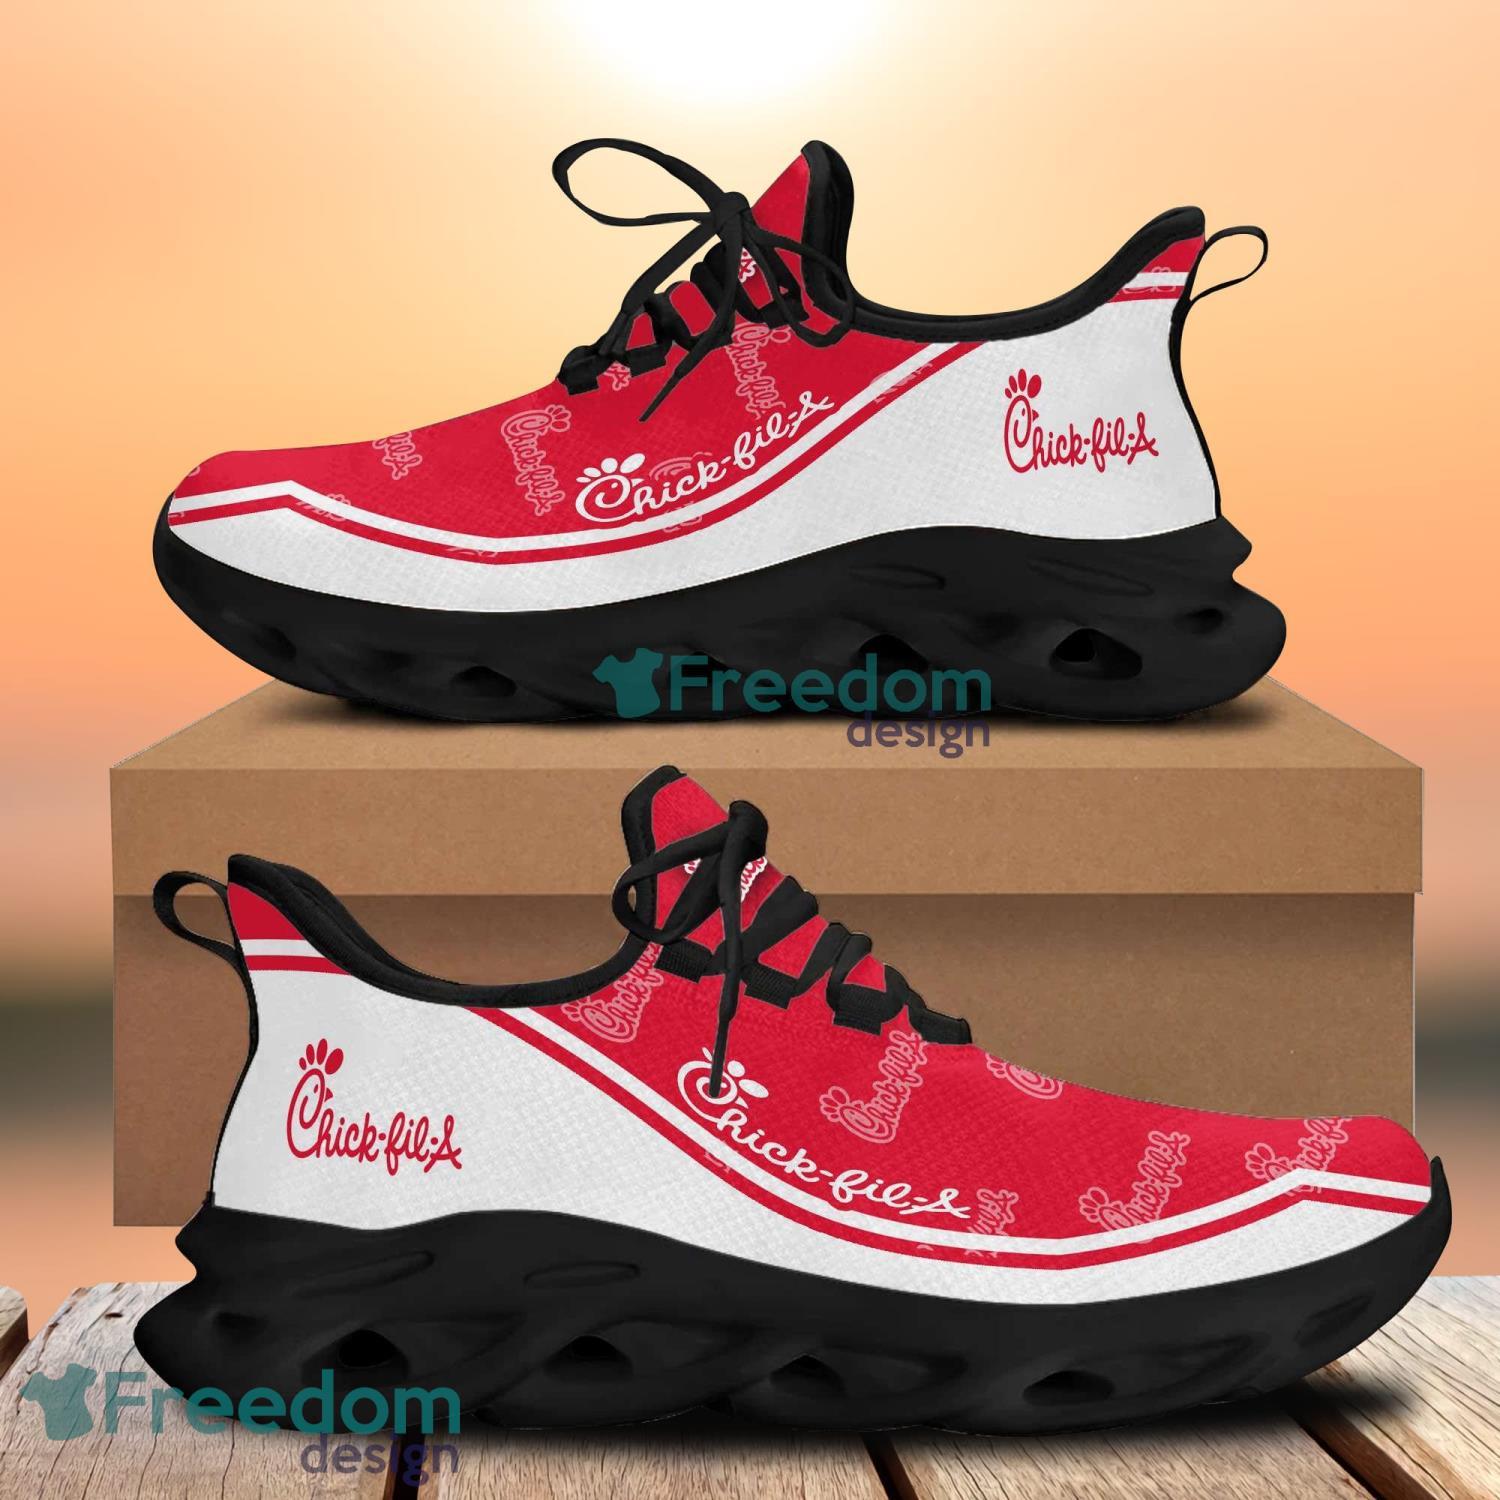 Chick-Fil-A US Flag Max Soul Shoes Running Sneakers